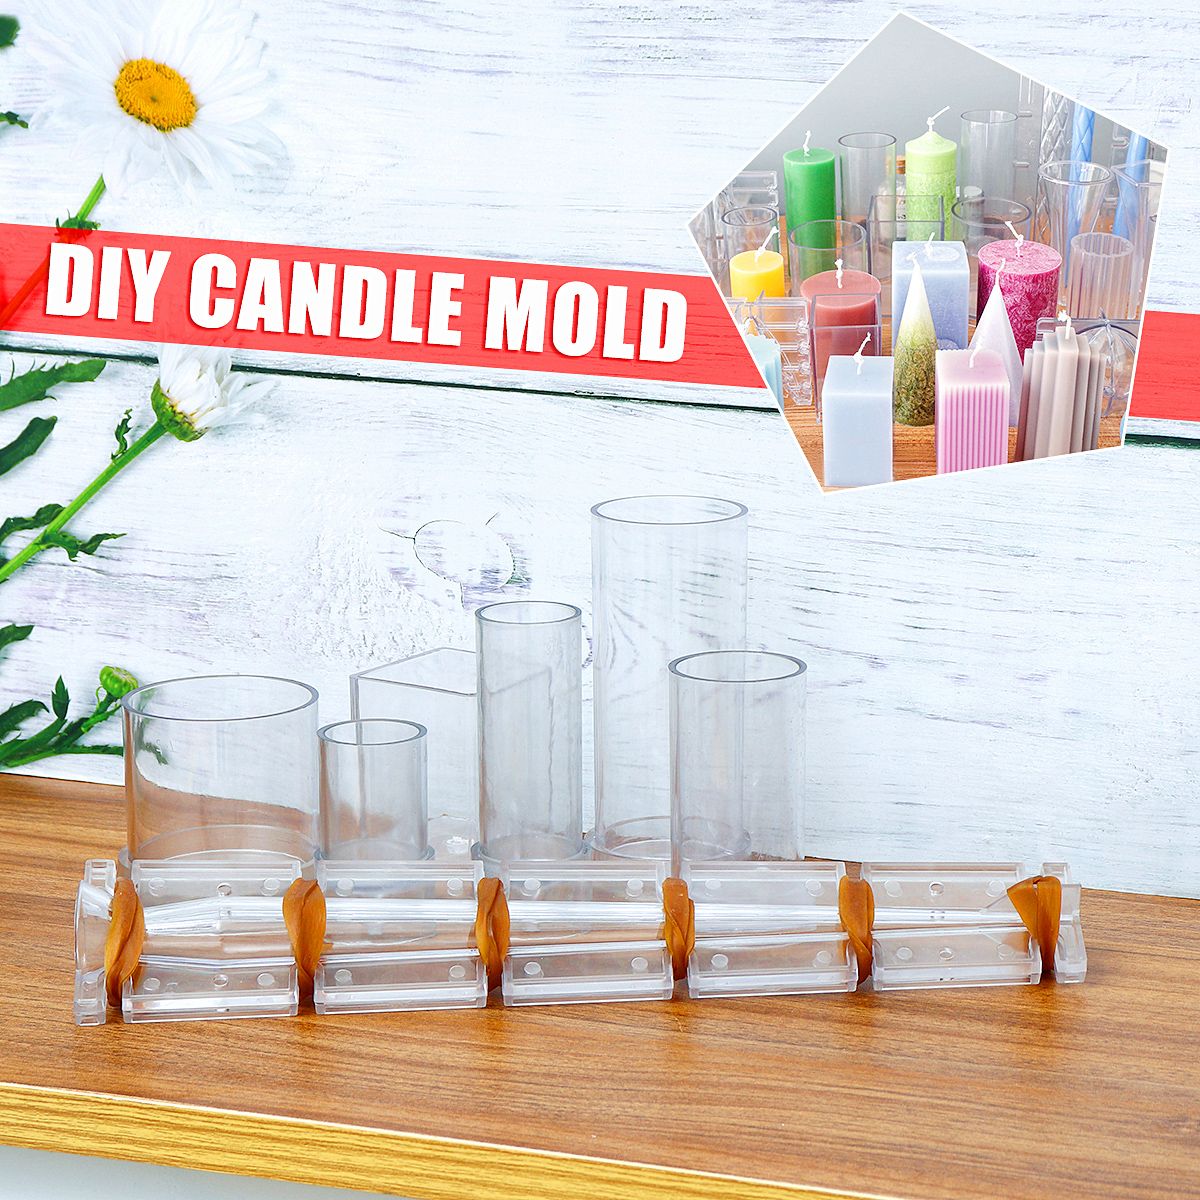 Clear-DIY-Handmade-Candle-Mould-Craft-Candle-Making-Molds-Prop-Reusable-Tool-1625511